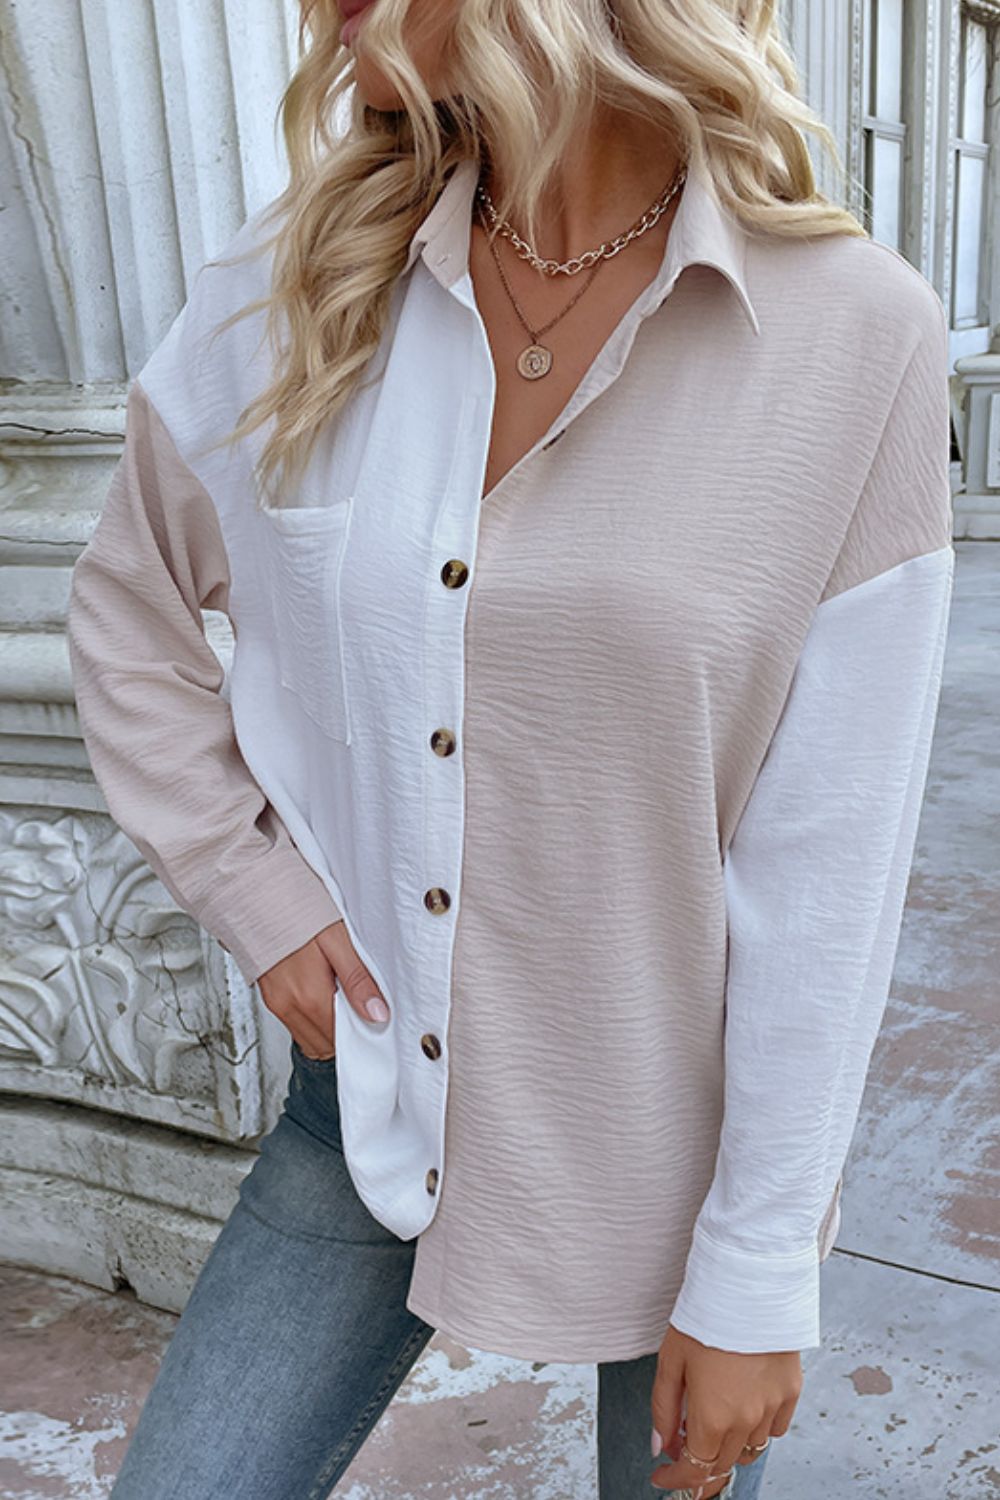 Color Block Textured Button-Up Shirt - Cream/White / S Apparel & Accessories Girl Code